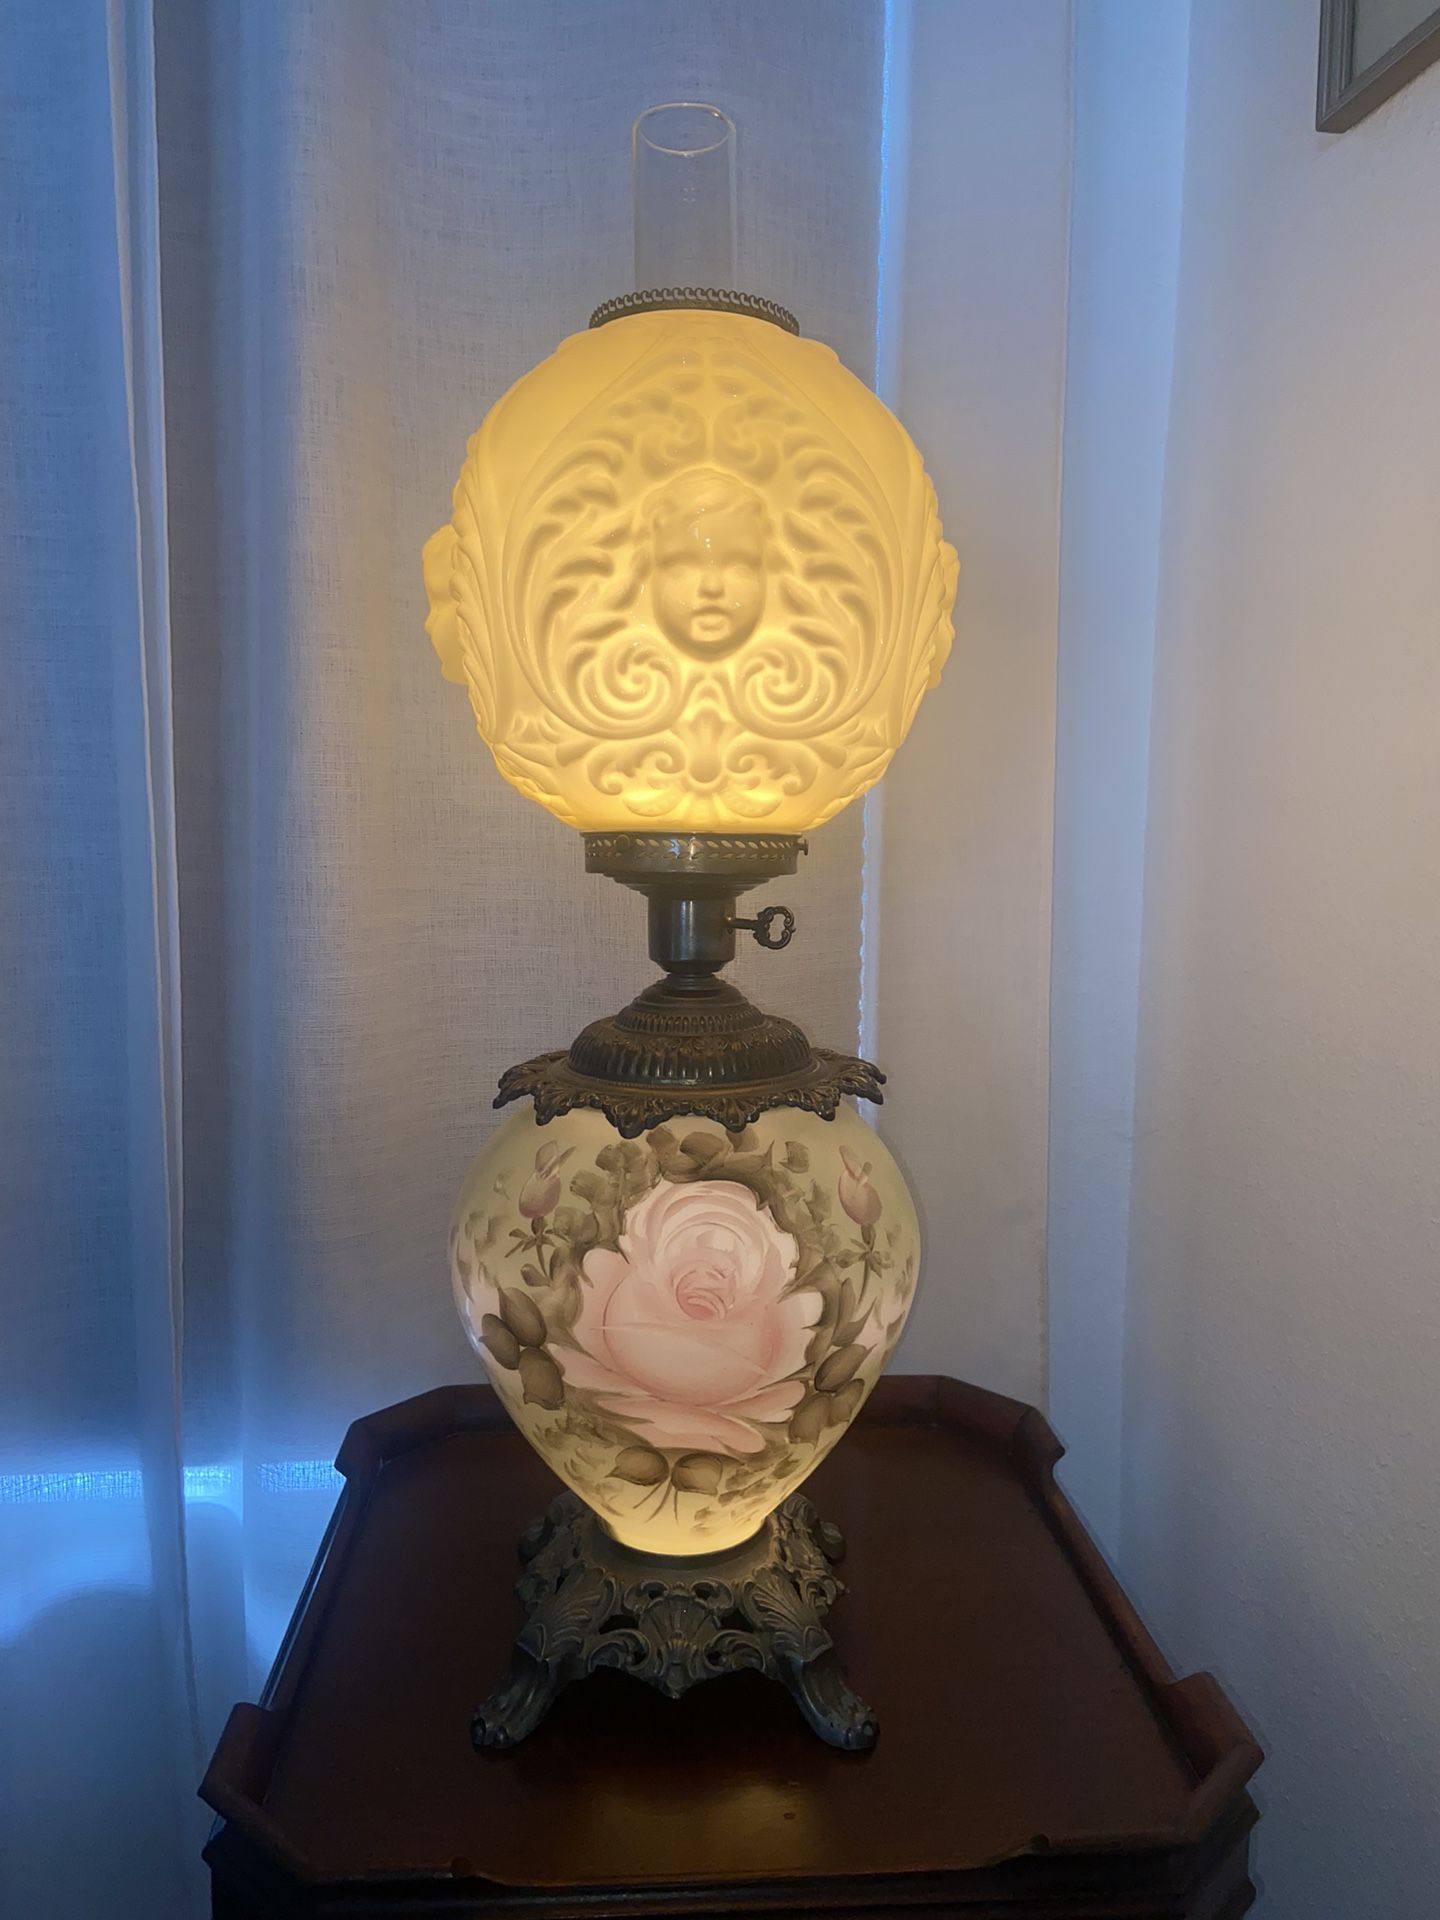 Antique “Gone with the Wind” Lamp